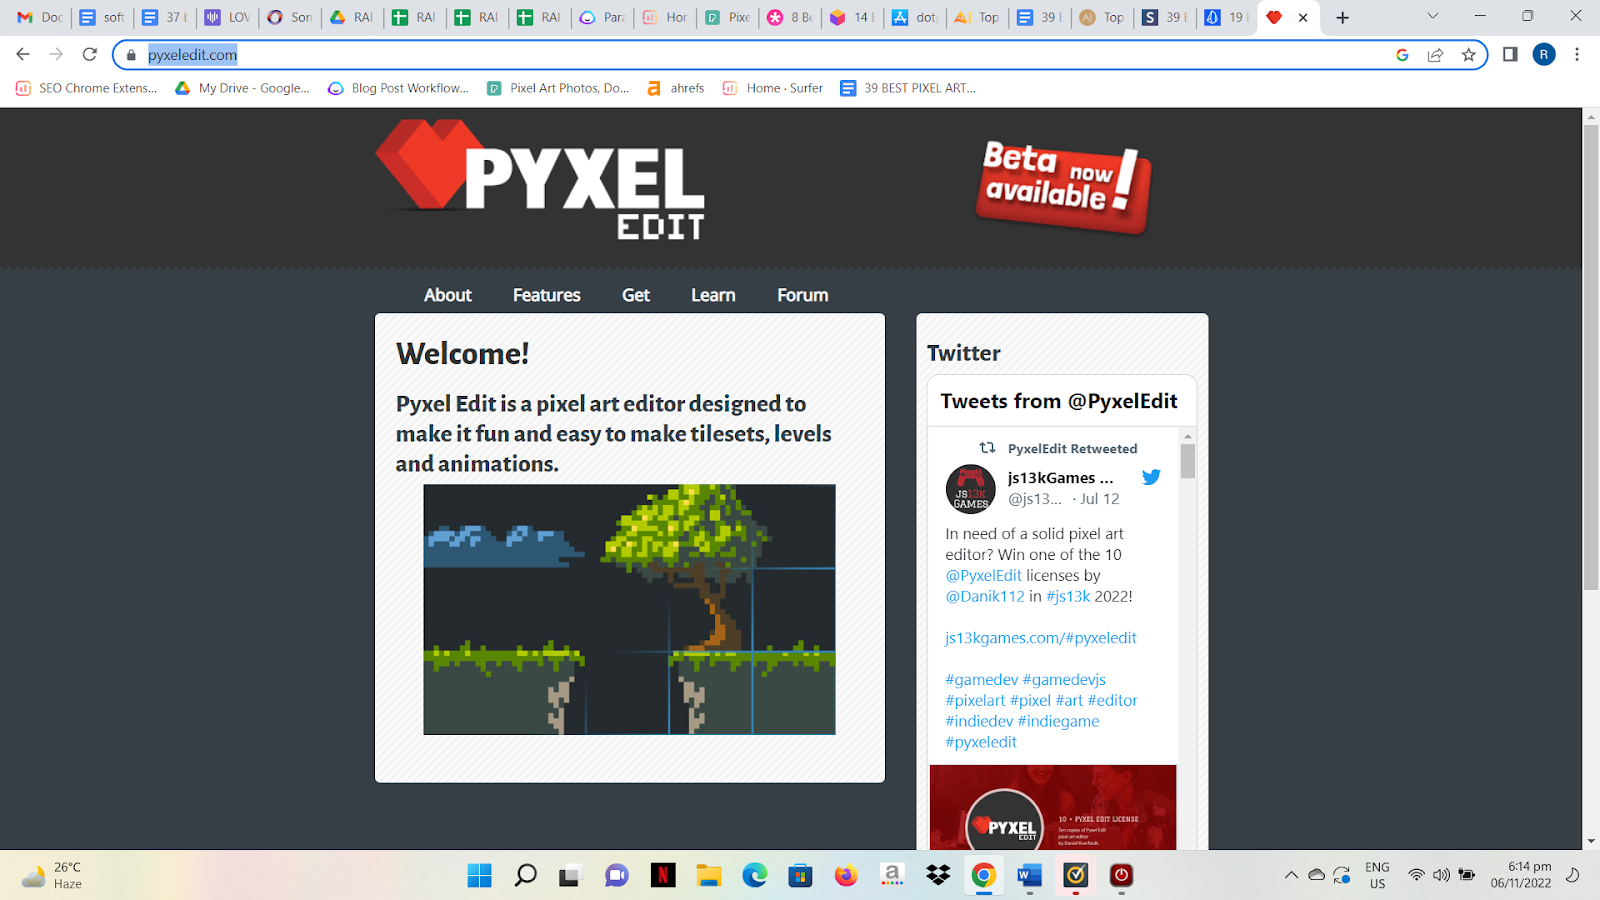 Pyxel Edit:user-friendly and equipped with everything you need to start animating your pixel art.